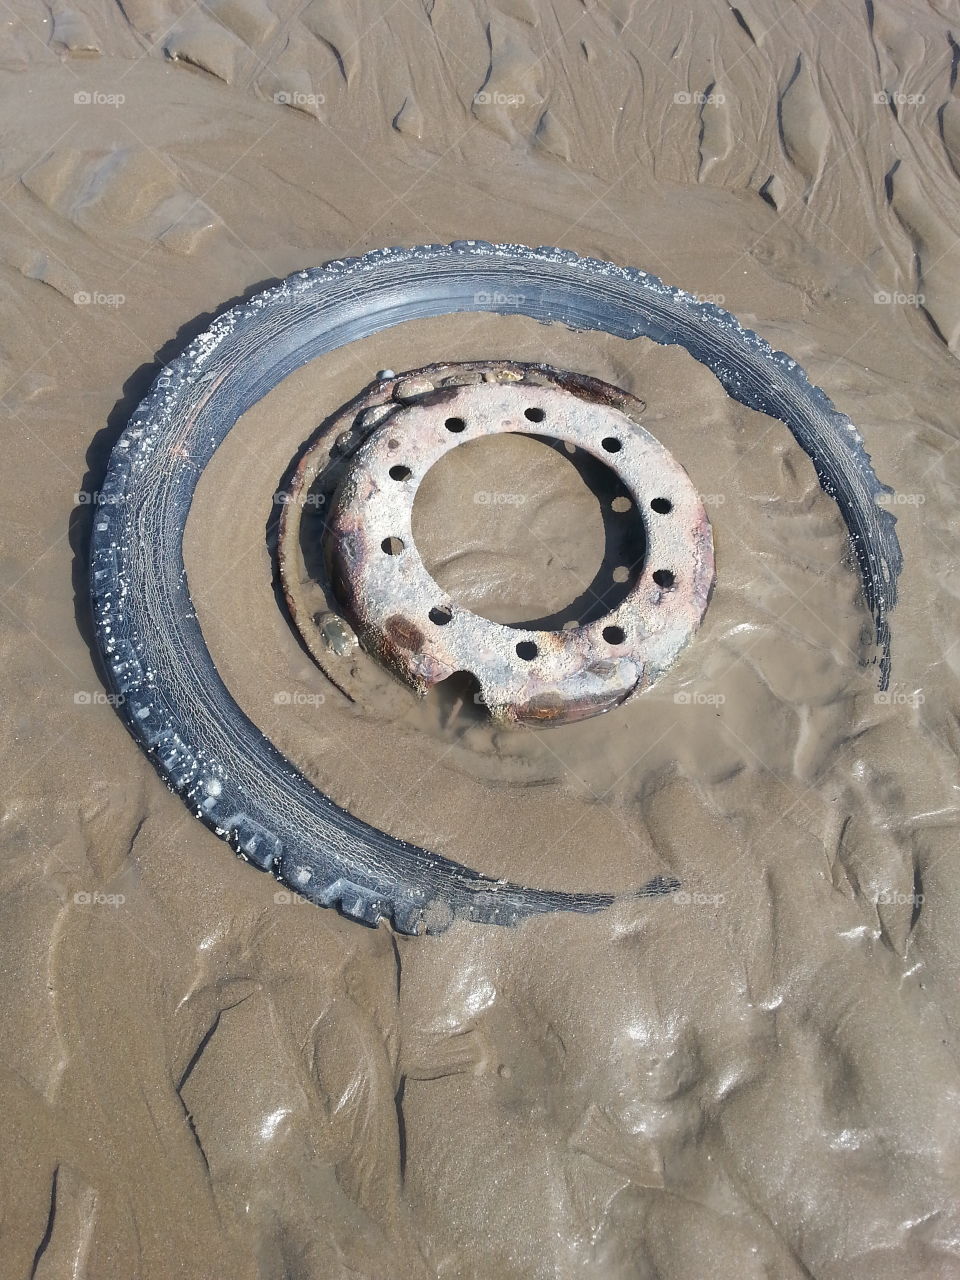 Tyre in the sand. Came across this washed up on my local beach in South Wales UK